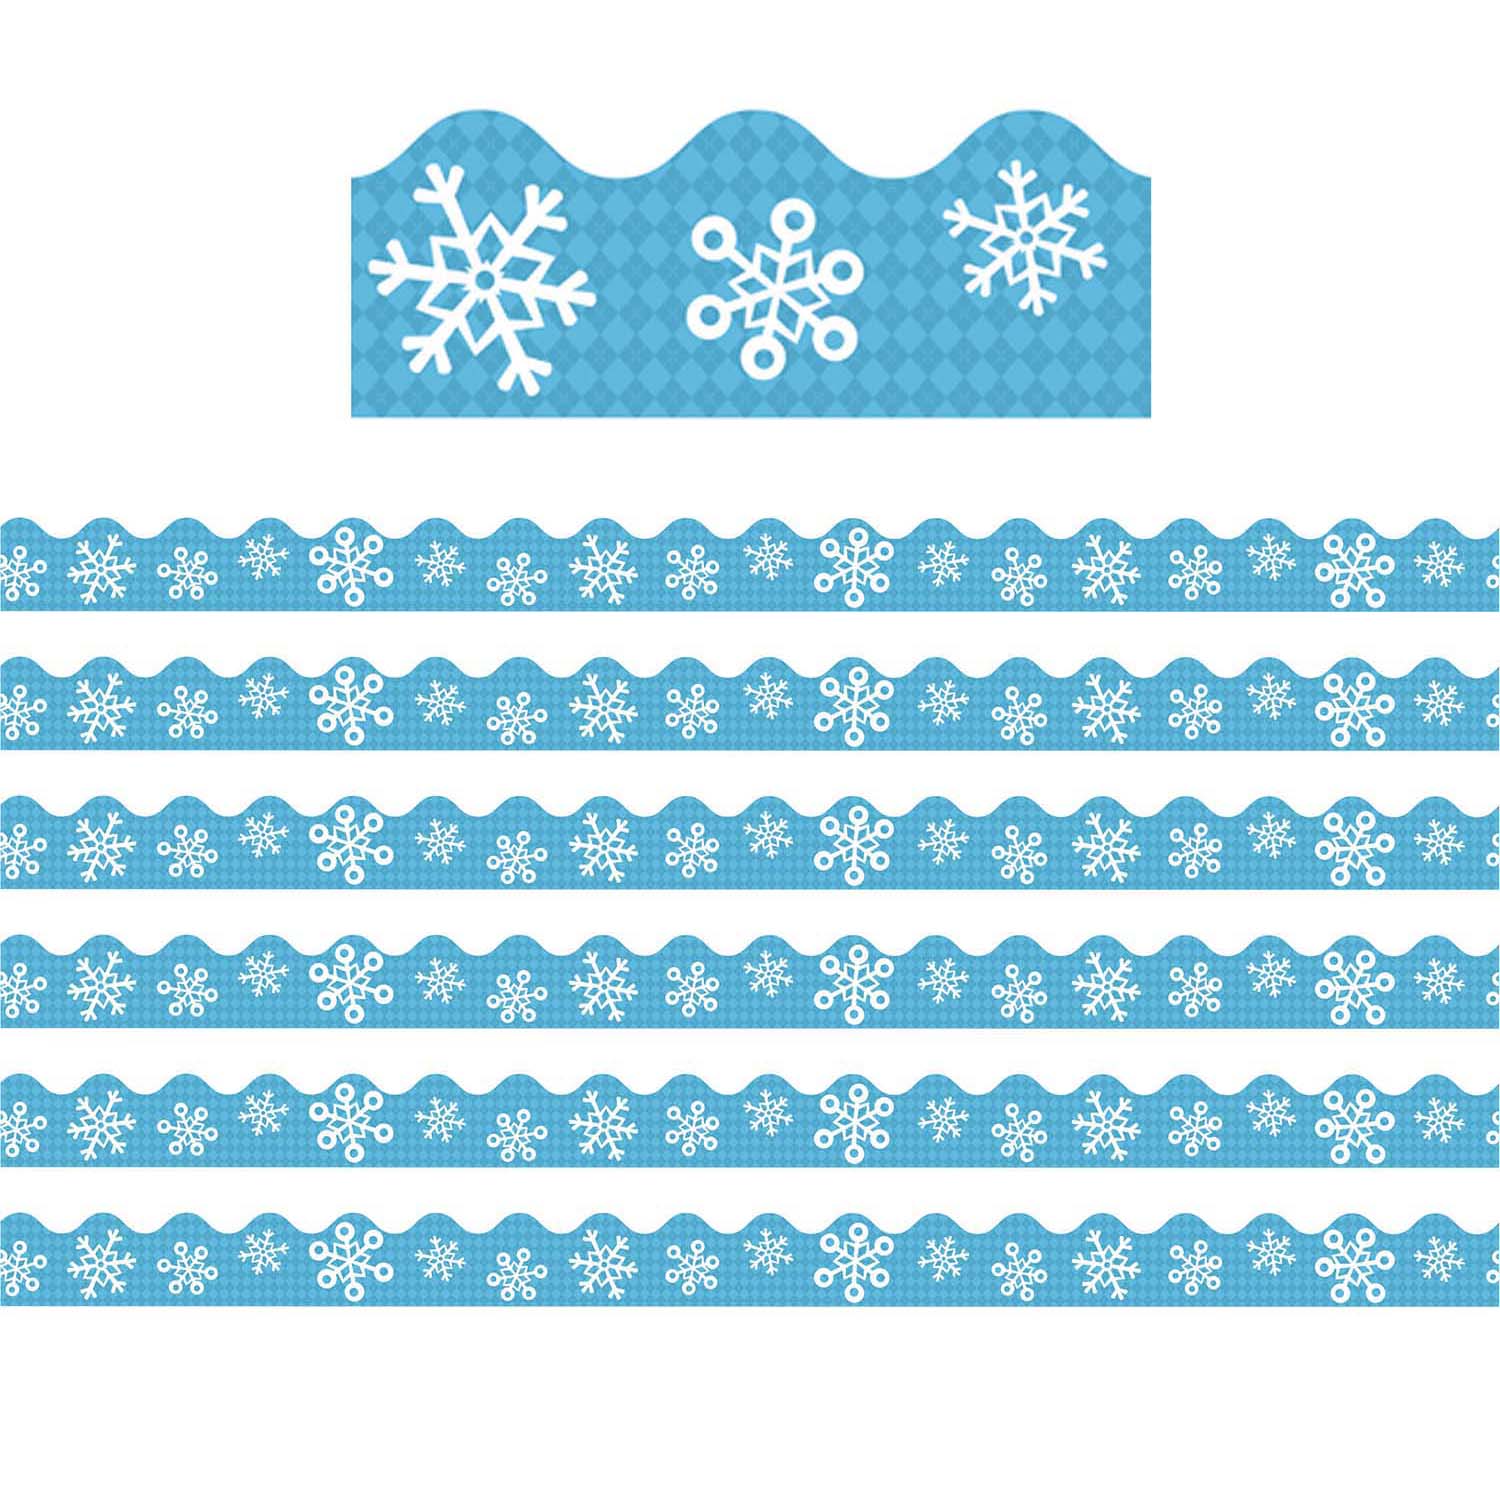 Snowflakes and Argyle Scalloped Border, 39 Feet Per Pack, 6 Packs